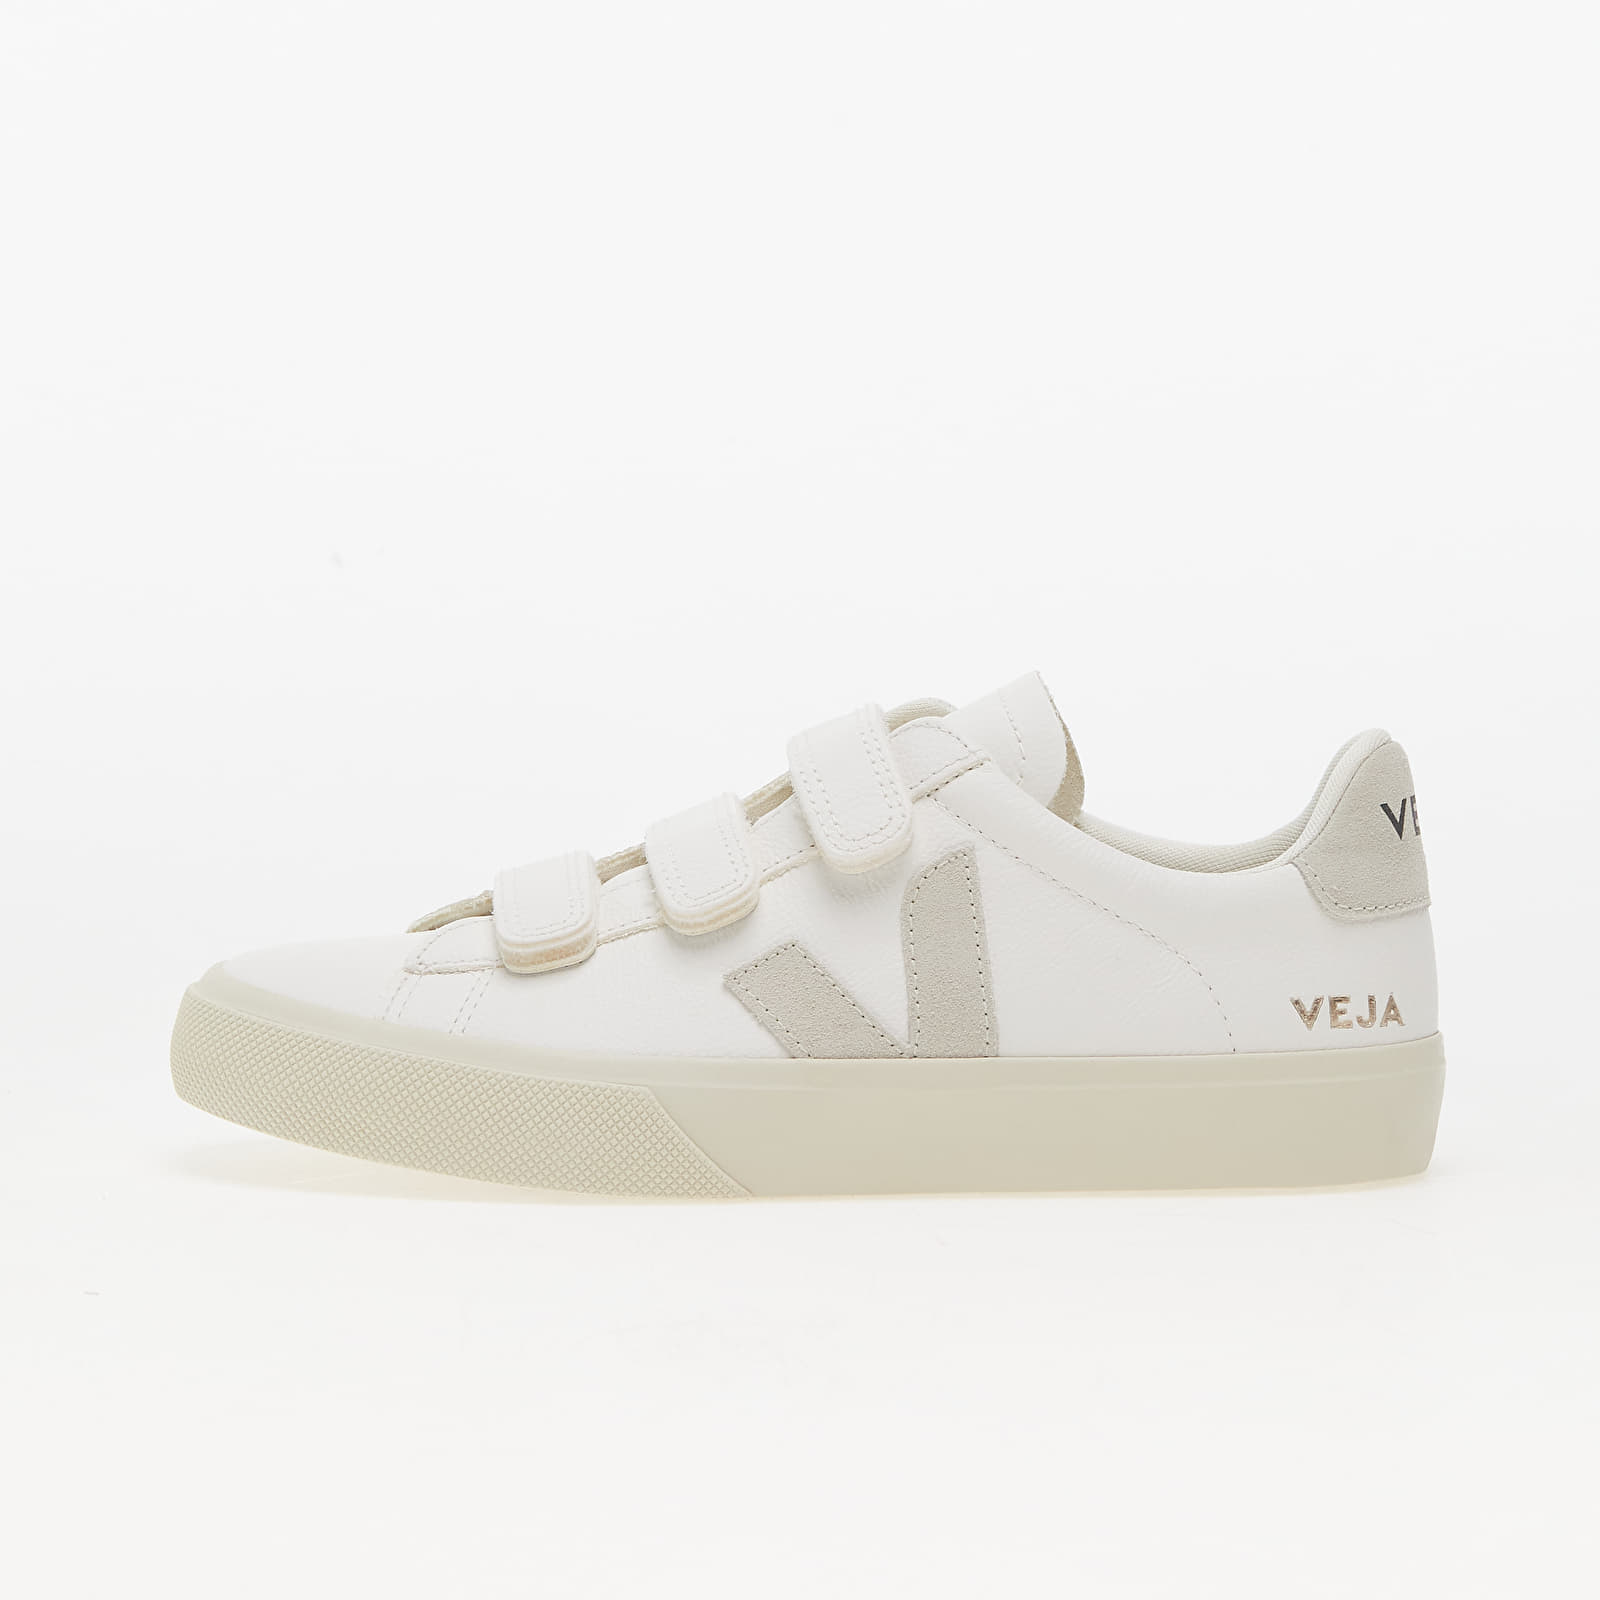 Women's shoes Veja Recife Chromefree Leather White Natural